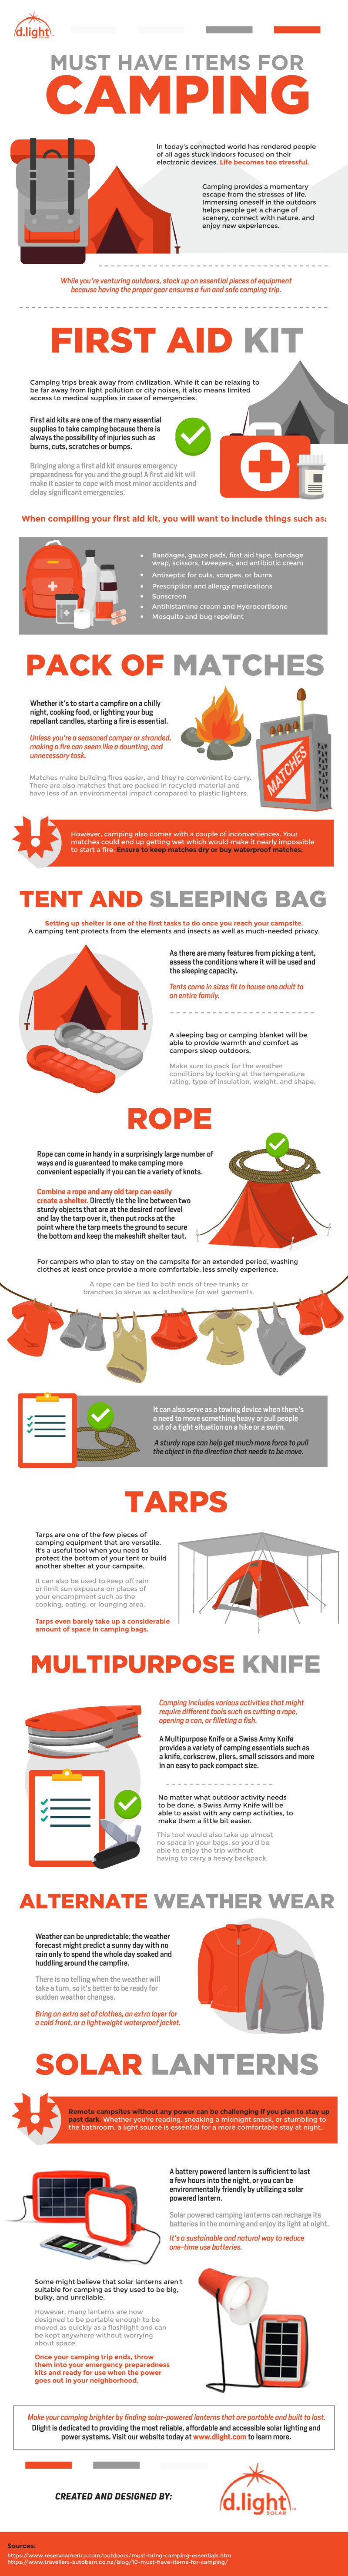 Must Have Items for Camping (Infographic)